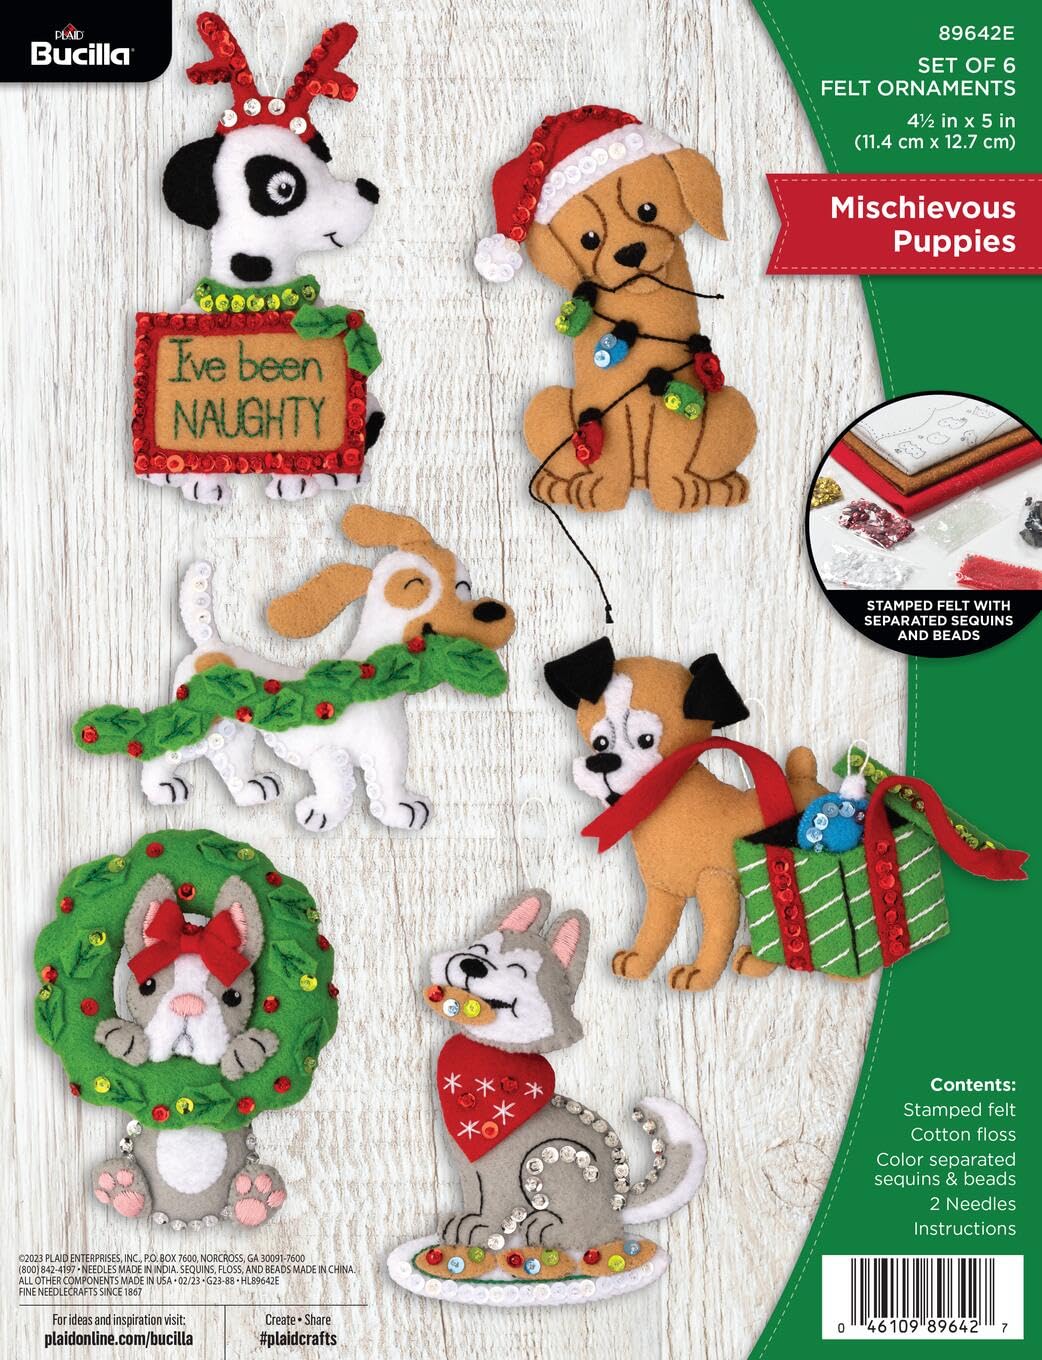 Bucilla, Mischievous Puppies, Felt Applique 6 Piece Ornament Making Kit, Perfect for Holiday DIY Arts and Crafts, 89642E